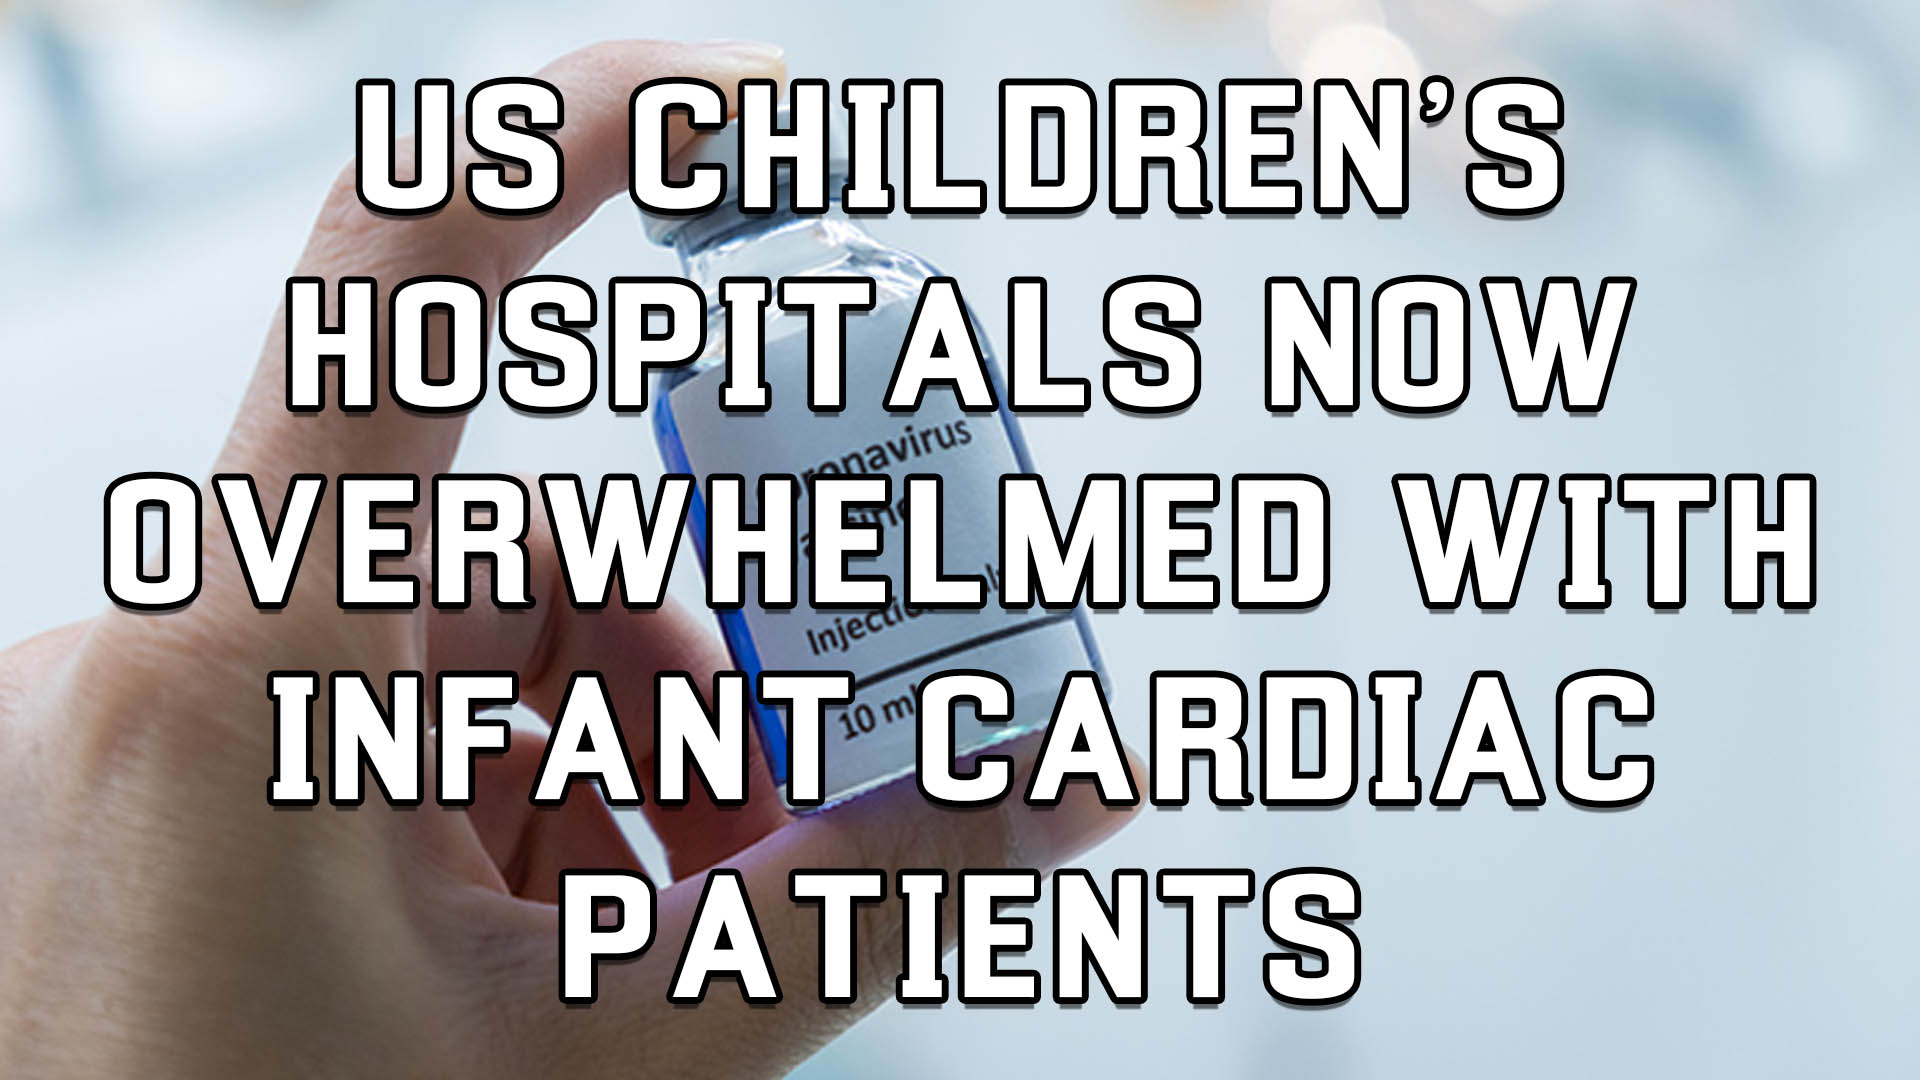 US Children’s Hospitals Now Overwhelmed with Infant Cardiac Patients – The Expose